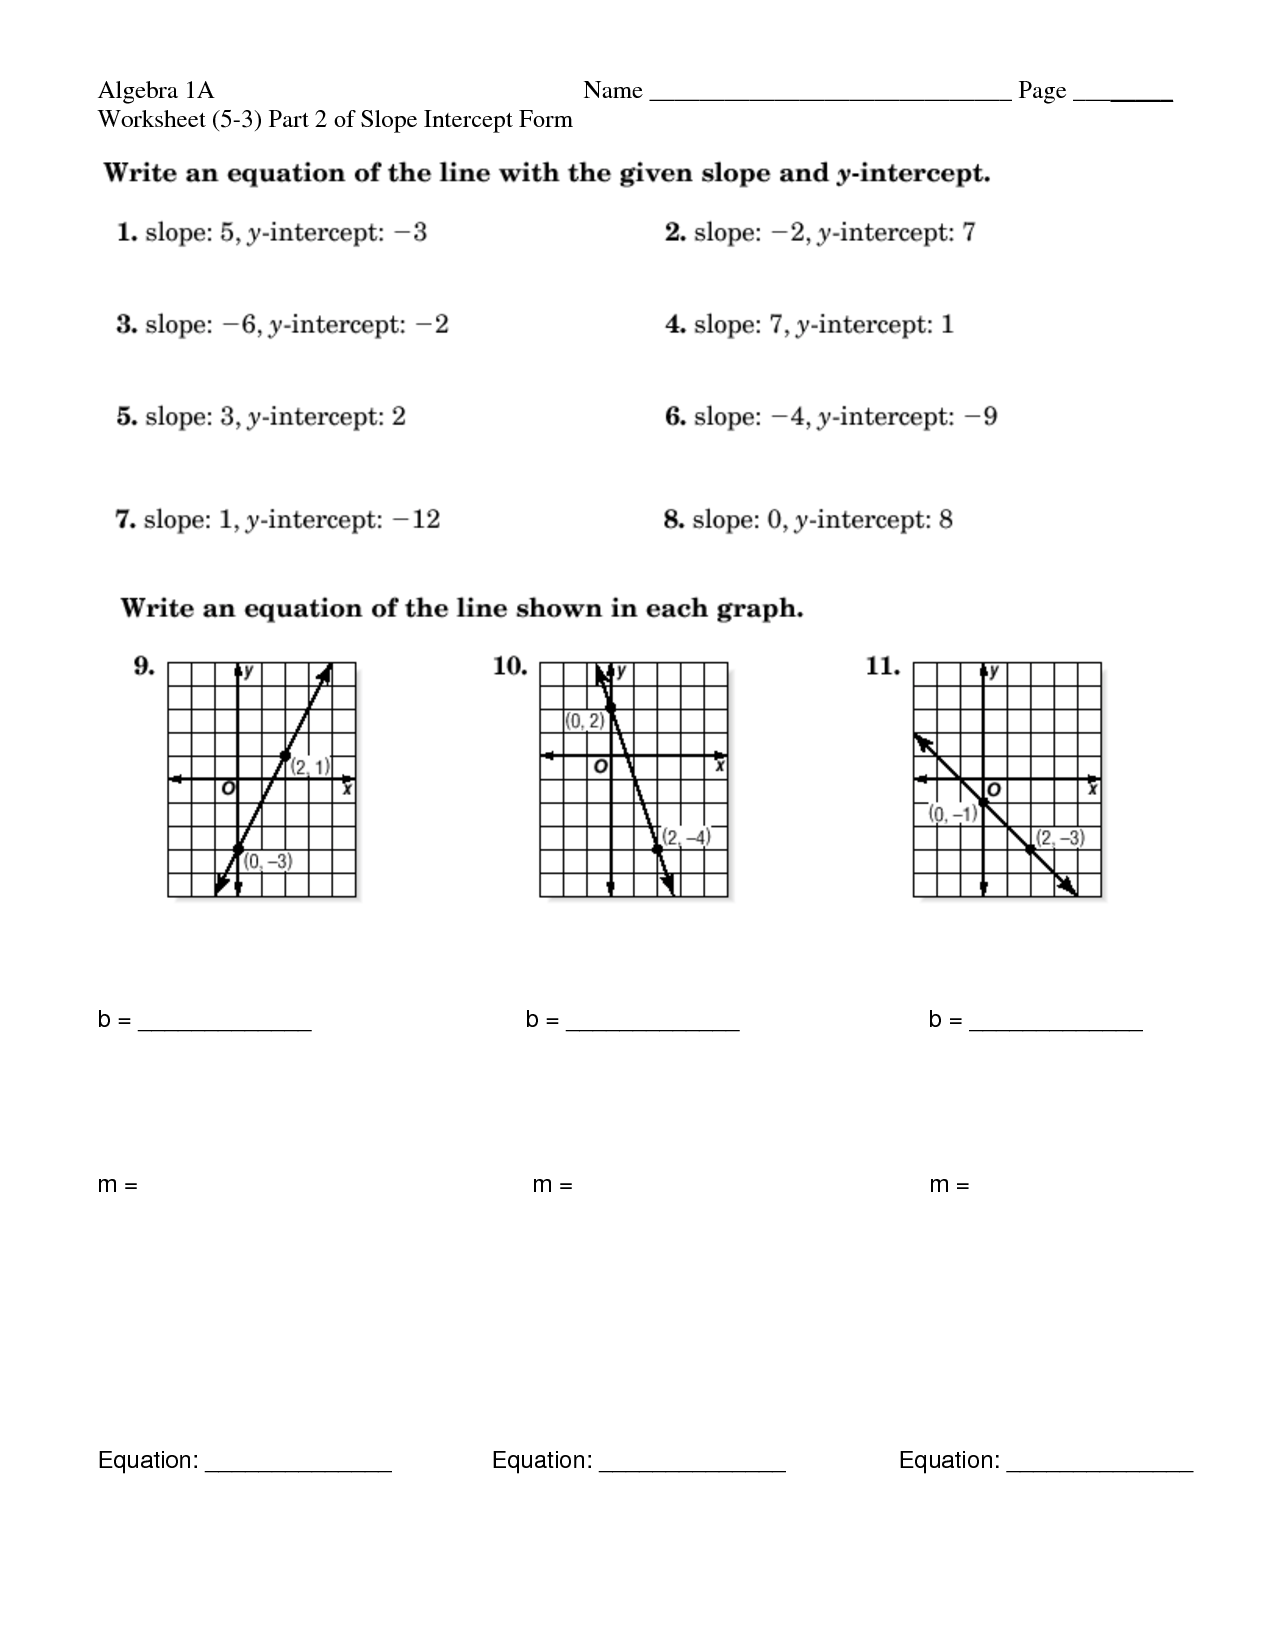 16-best-images-of-graphing-linear-equations-algebra-1-worksheet-answers-math-equations-pre